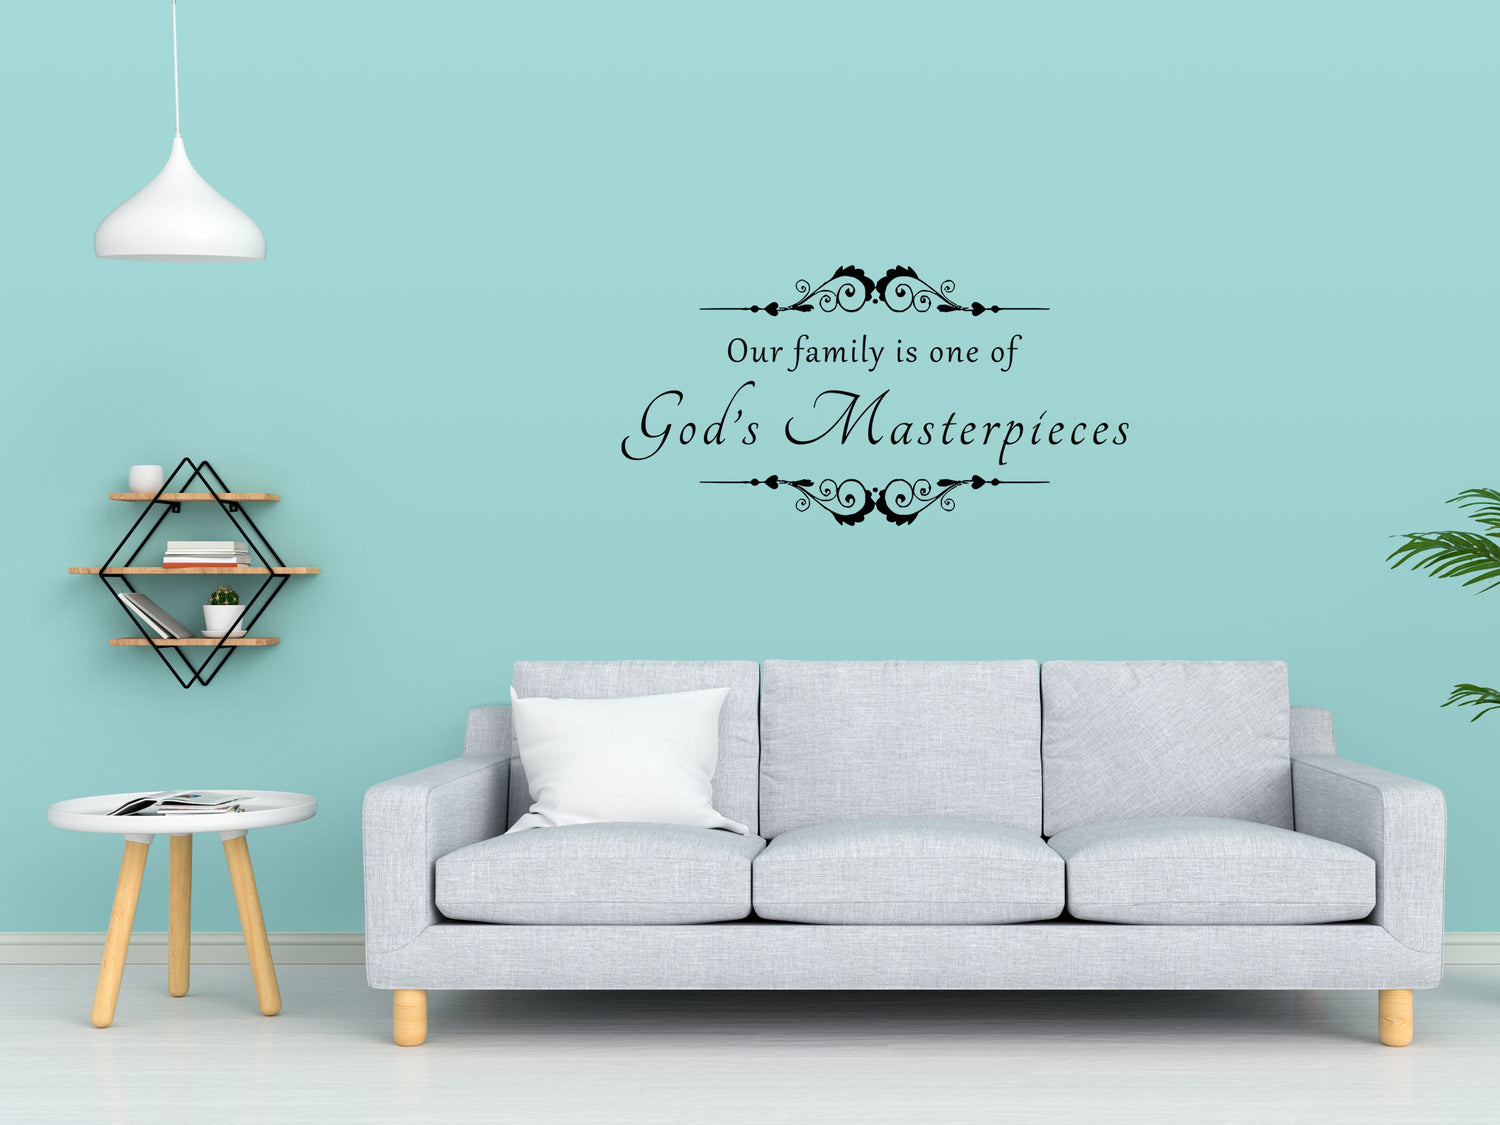 Our Family Is One Of God's Masterpieces Vinyl Wall Decal Inspirational Wall Signs 